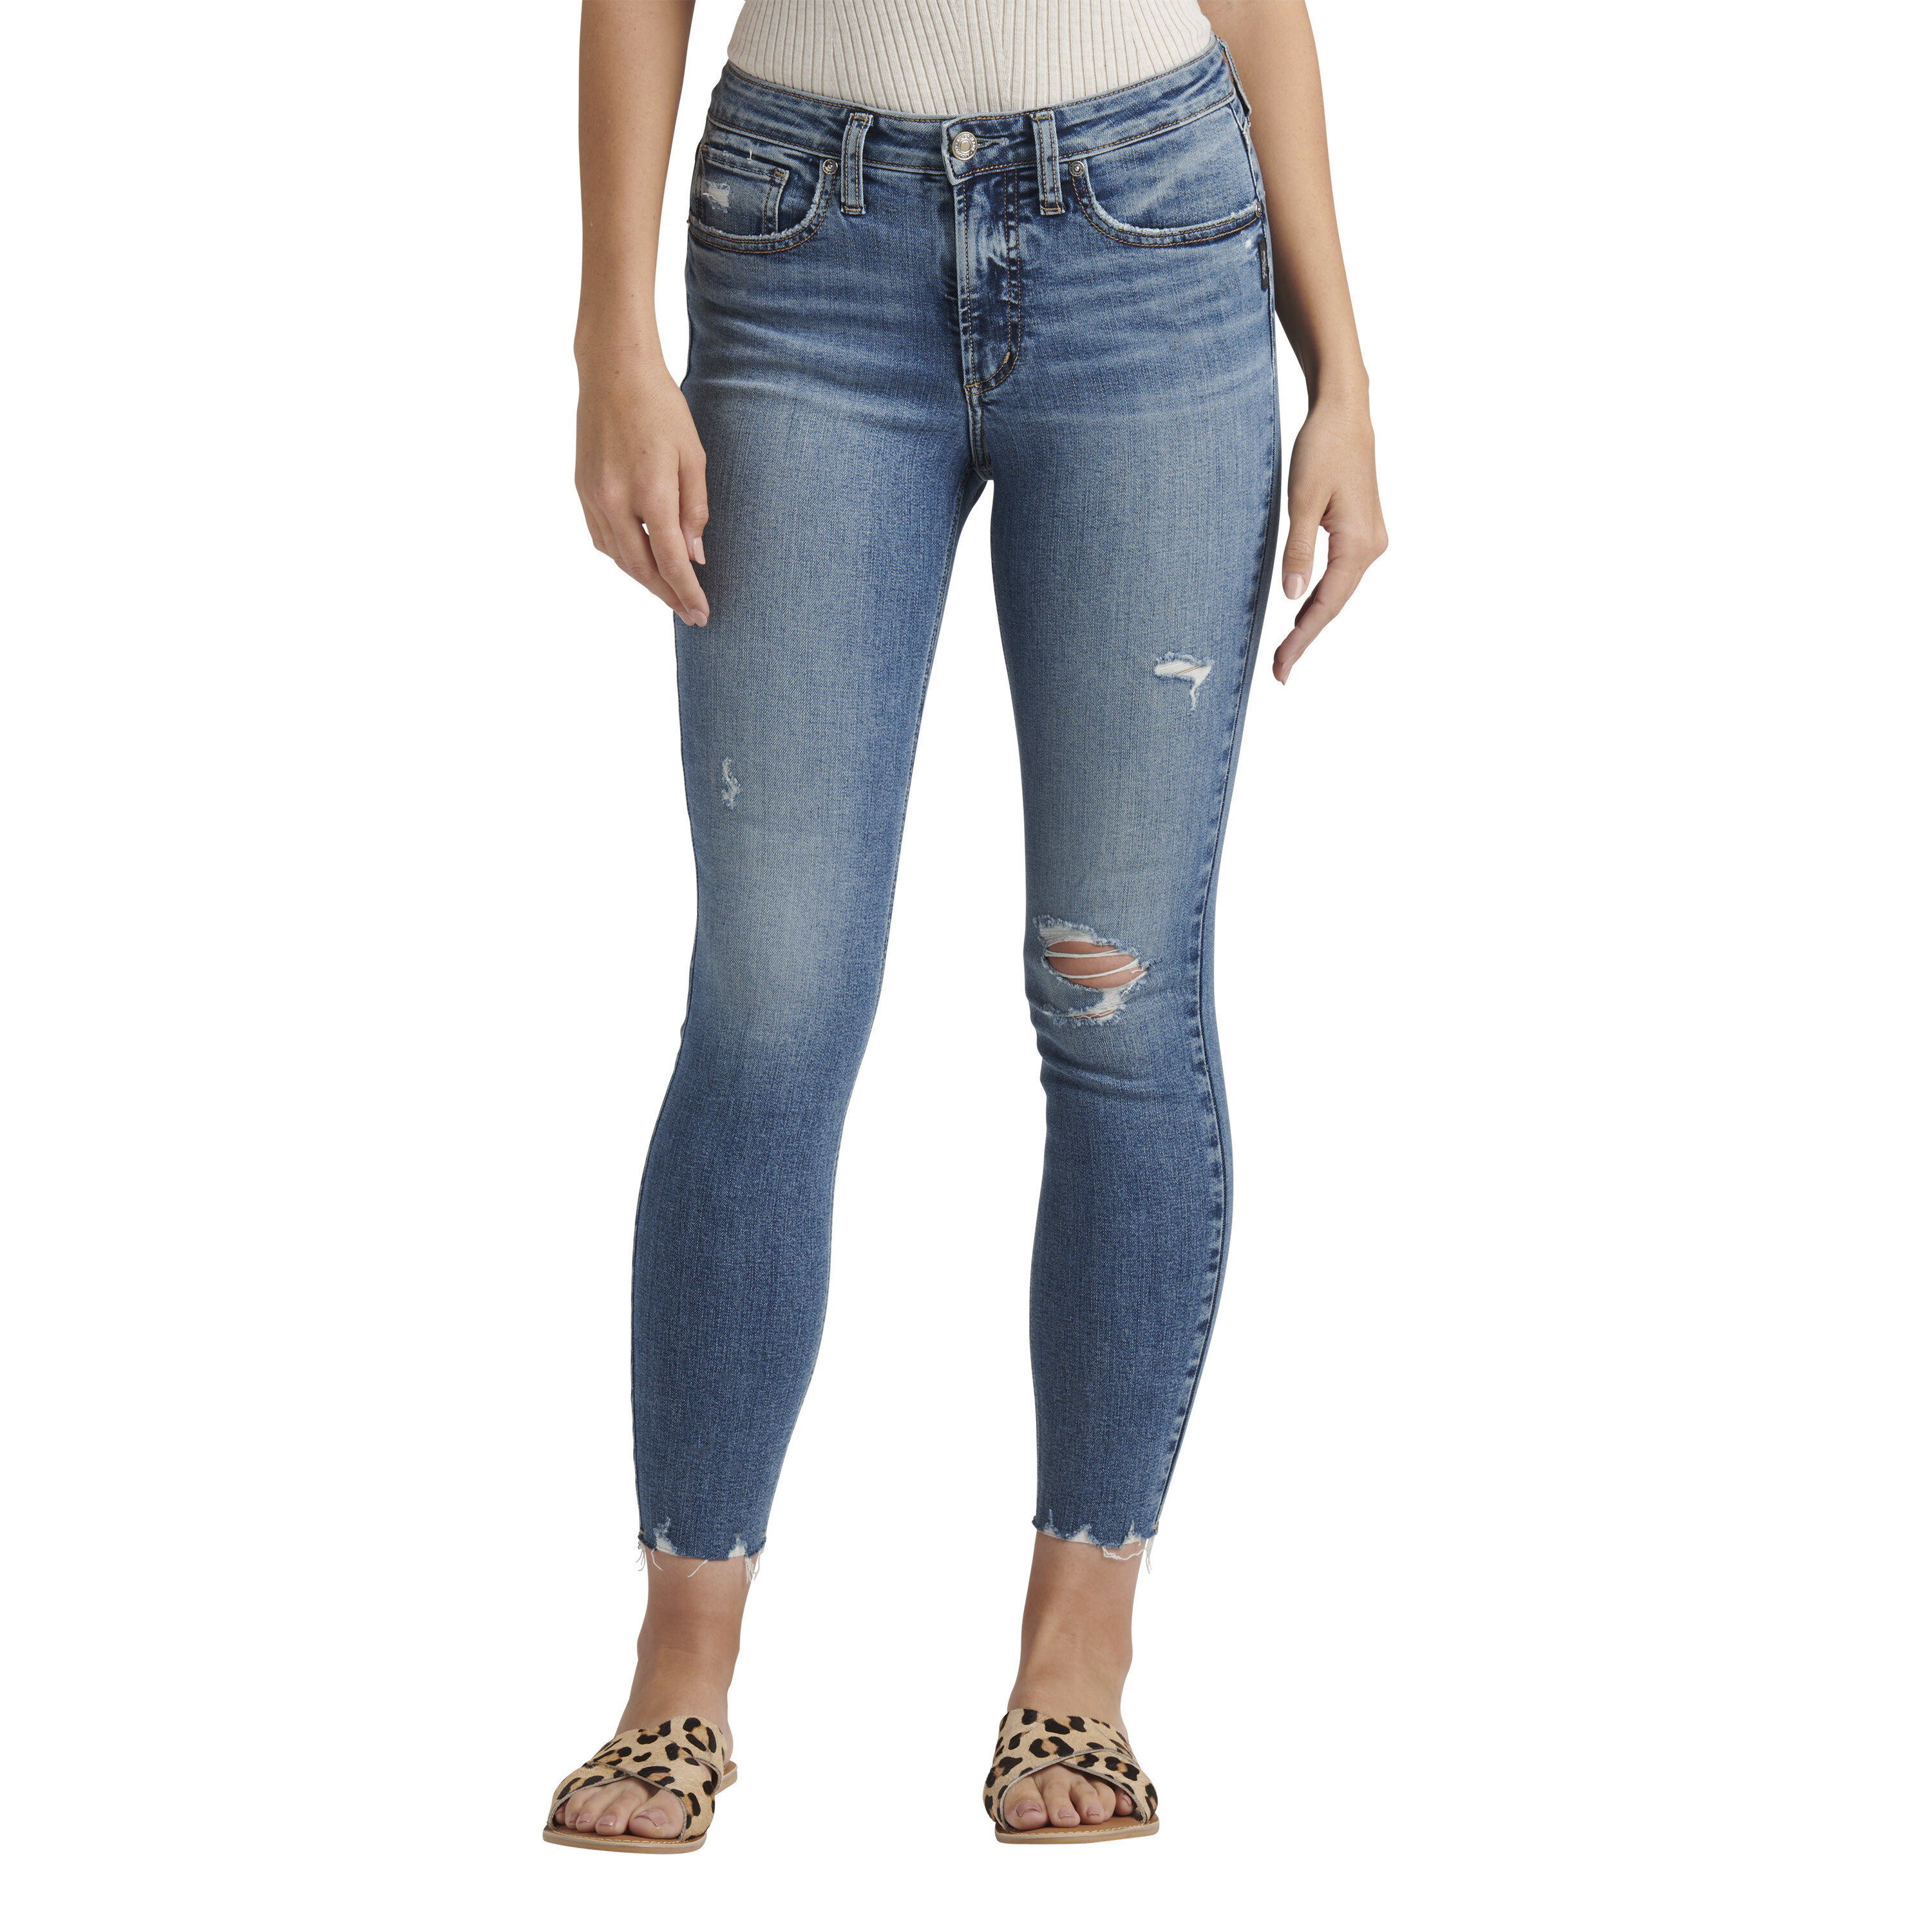 Imbracaminte Femei Silver Jeans Co Most Wanted Mid-Rise Skinny Jeans L63022EGX269 Indigo